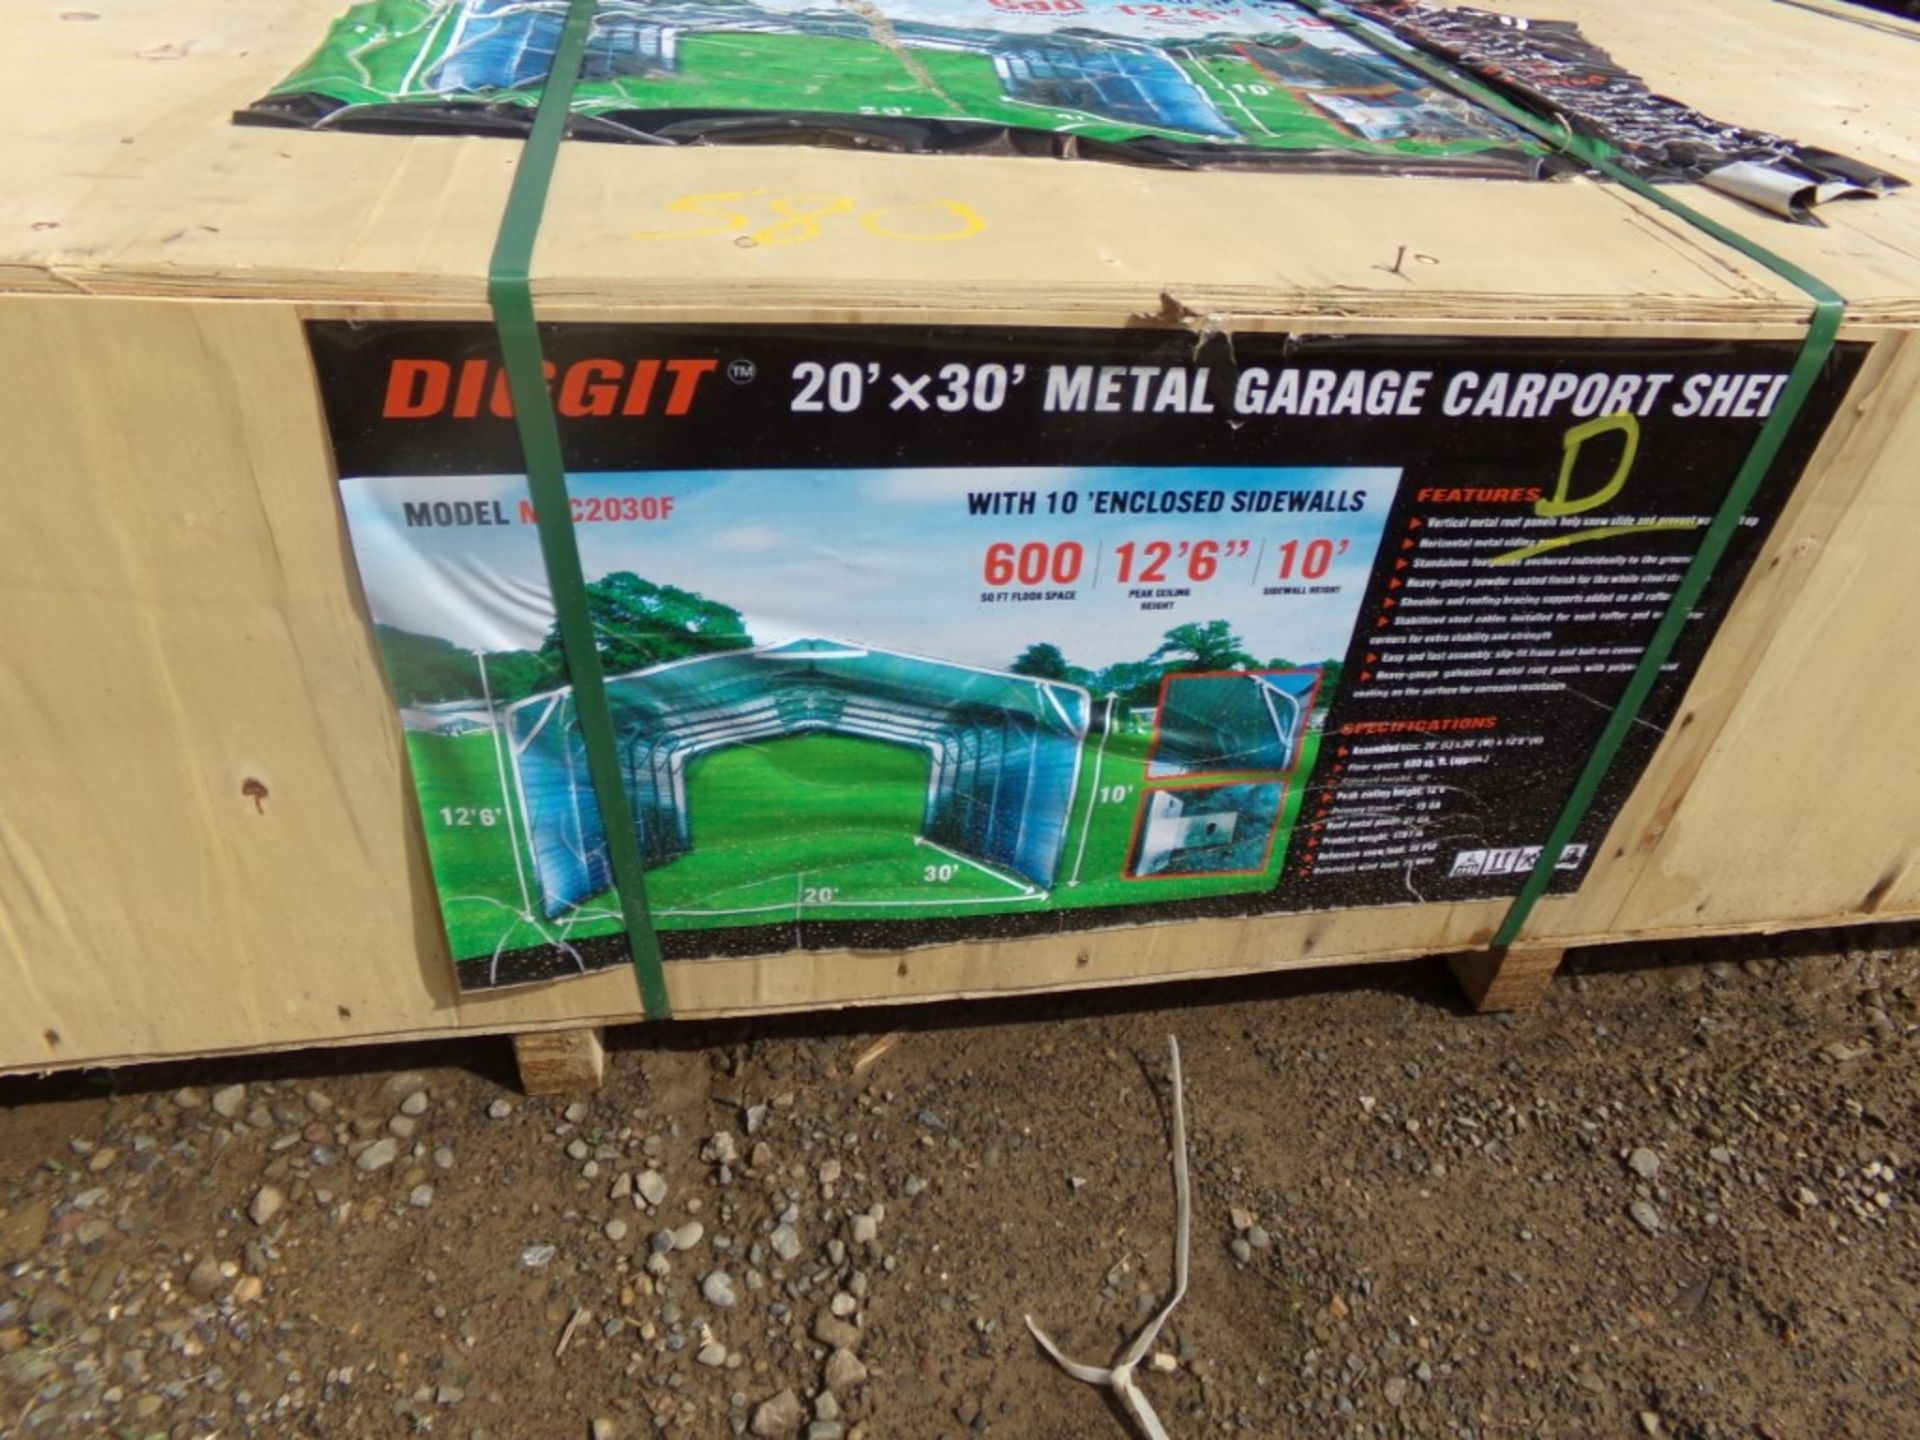 New Diggit 20' x 30' Metal Garage/Carport/Shed with 10' Sidewalls and 12'6'' Center - Image 2 of 2